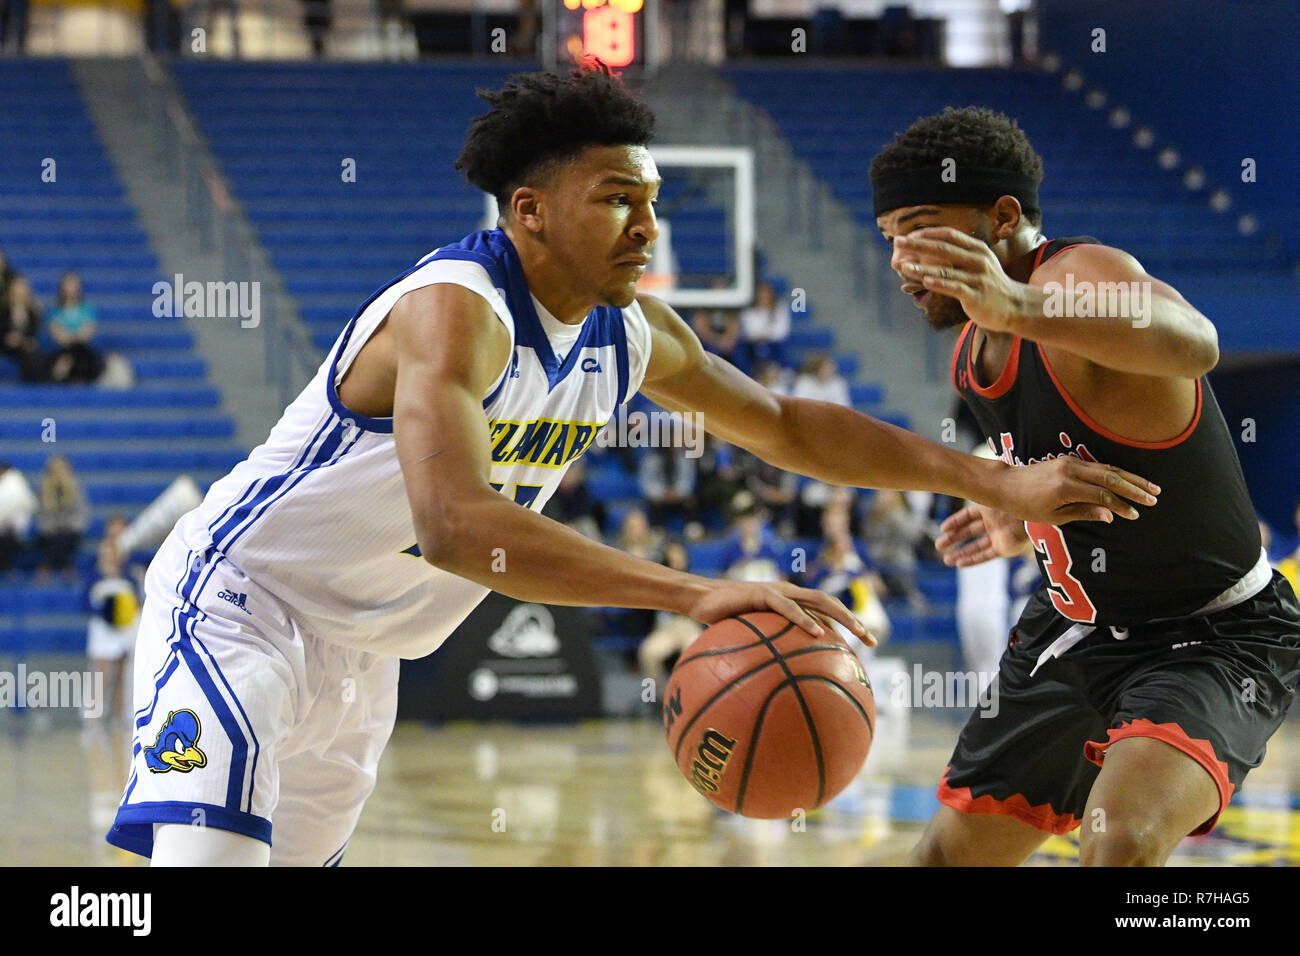 Newark, Delaware, USA. 9th Dec, 2018. Delaware Fightin Blue Hens guard ITHIEL HORTON (12) tries to drive by St. Francis (Pa) Red Flash guard JAMAAL KING (3) during the basketball game played at the Bob Carpenter Center in Newark, DE. The Blue Hens beat the Red Flash 88-83. Credit: Ken Inness/ZUMA Wire/Alamy Live News Stock Photo